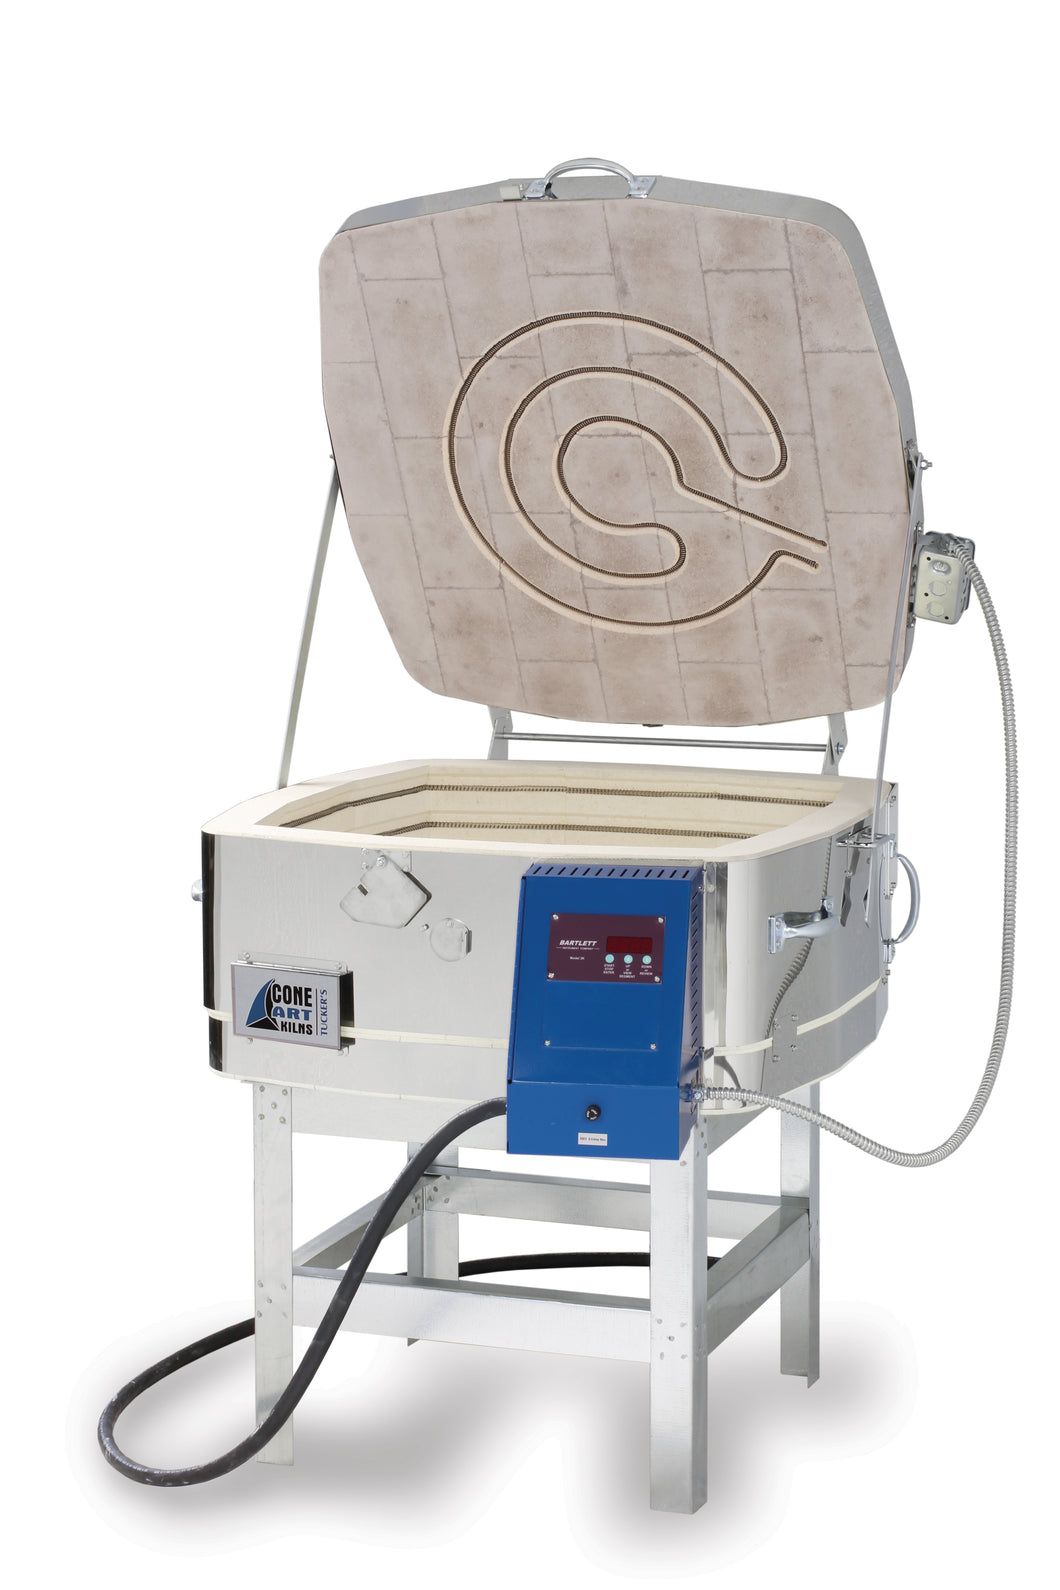 Tuckers Cone Art 2313G square glass kiln is a versatile model capable of firing many small pieces or individual large platters.